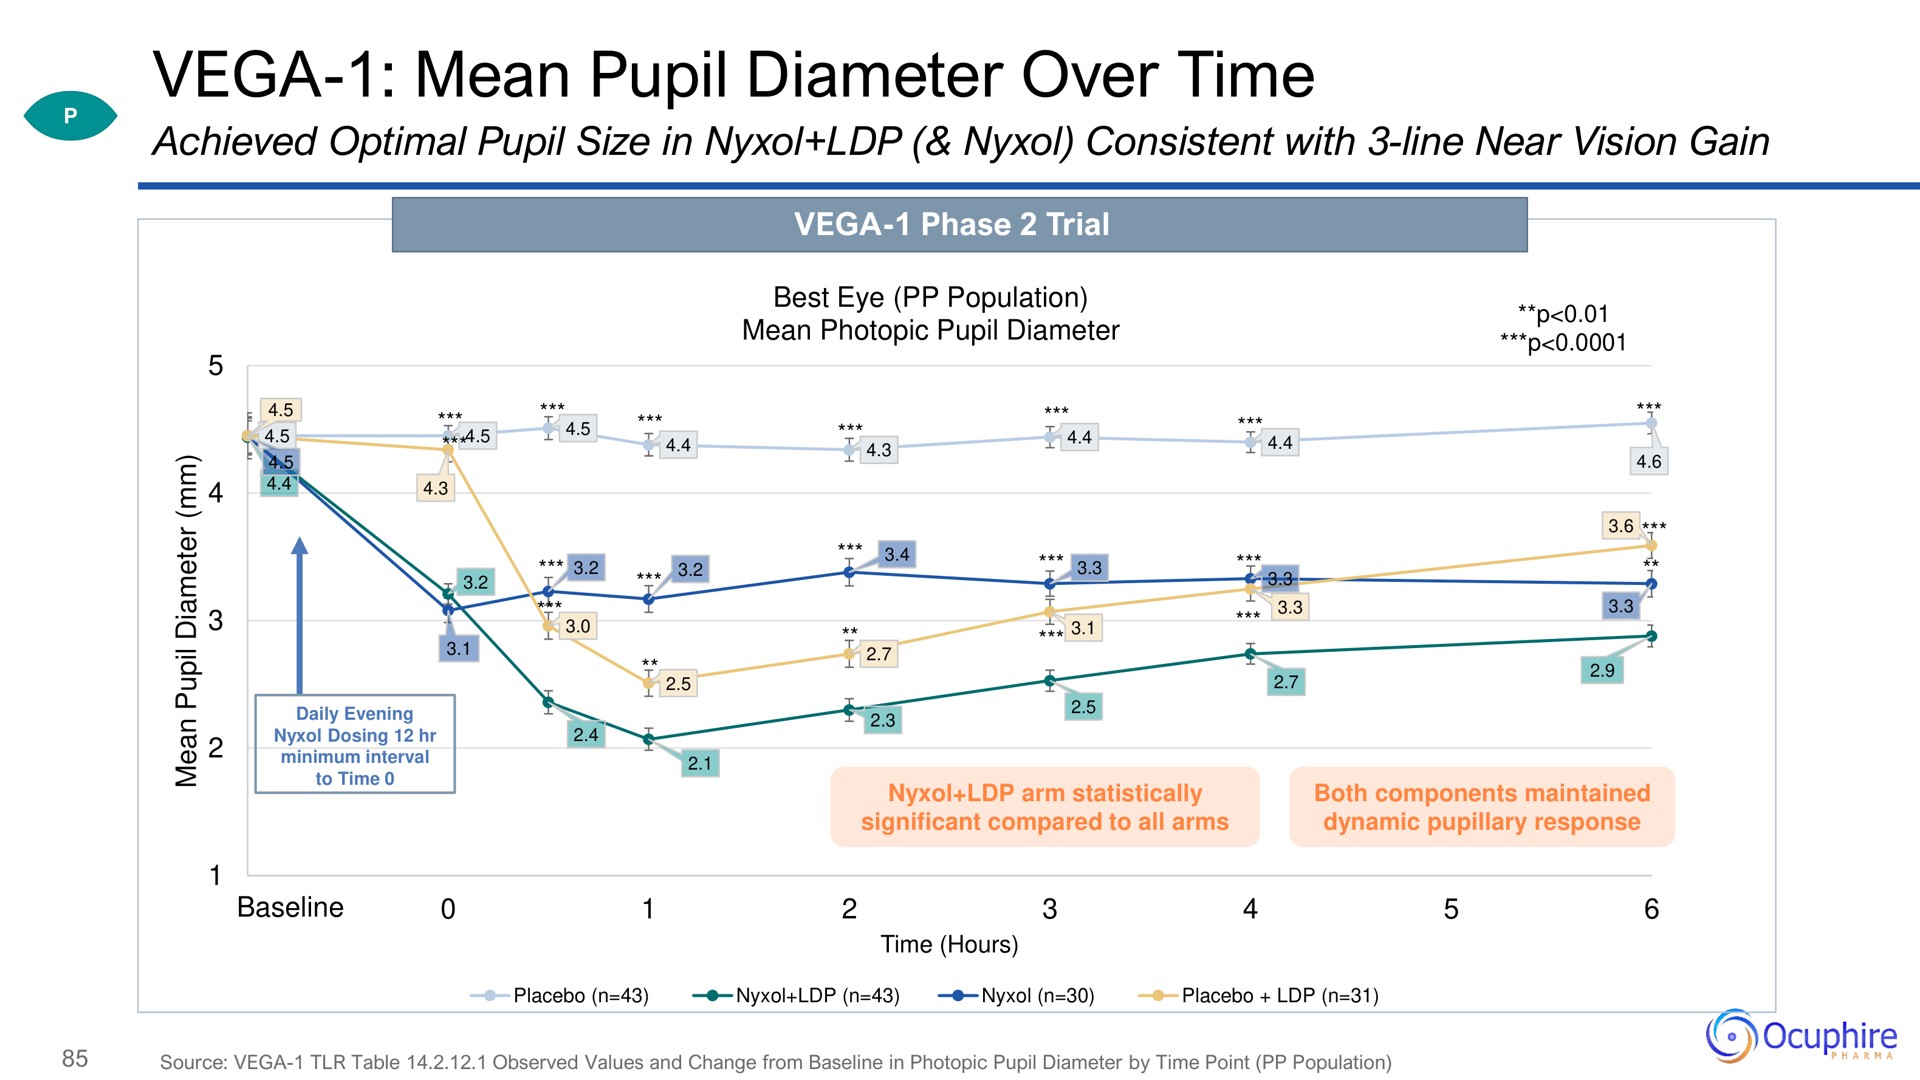 mean pupil diameter over time a | Ocuphire Pharma